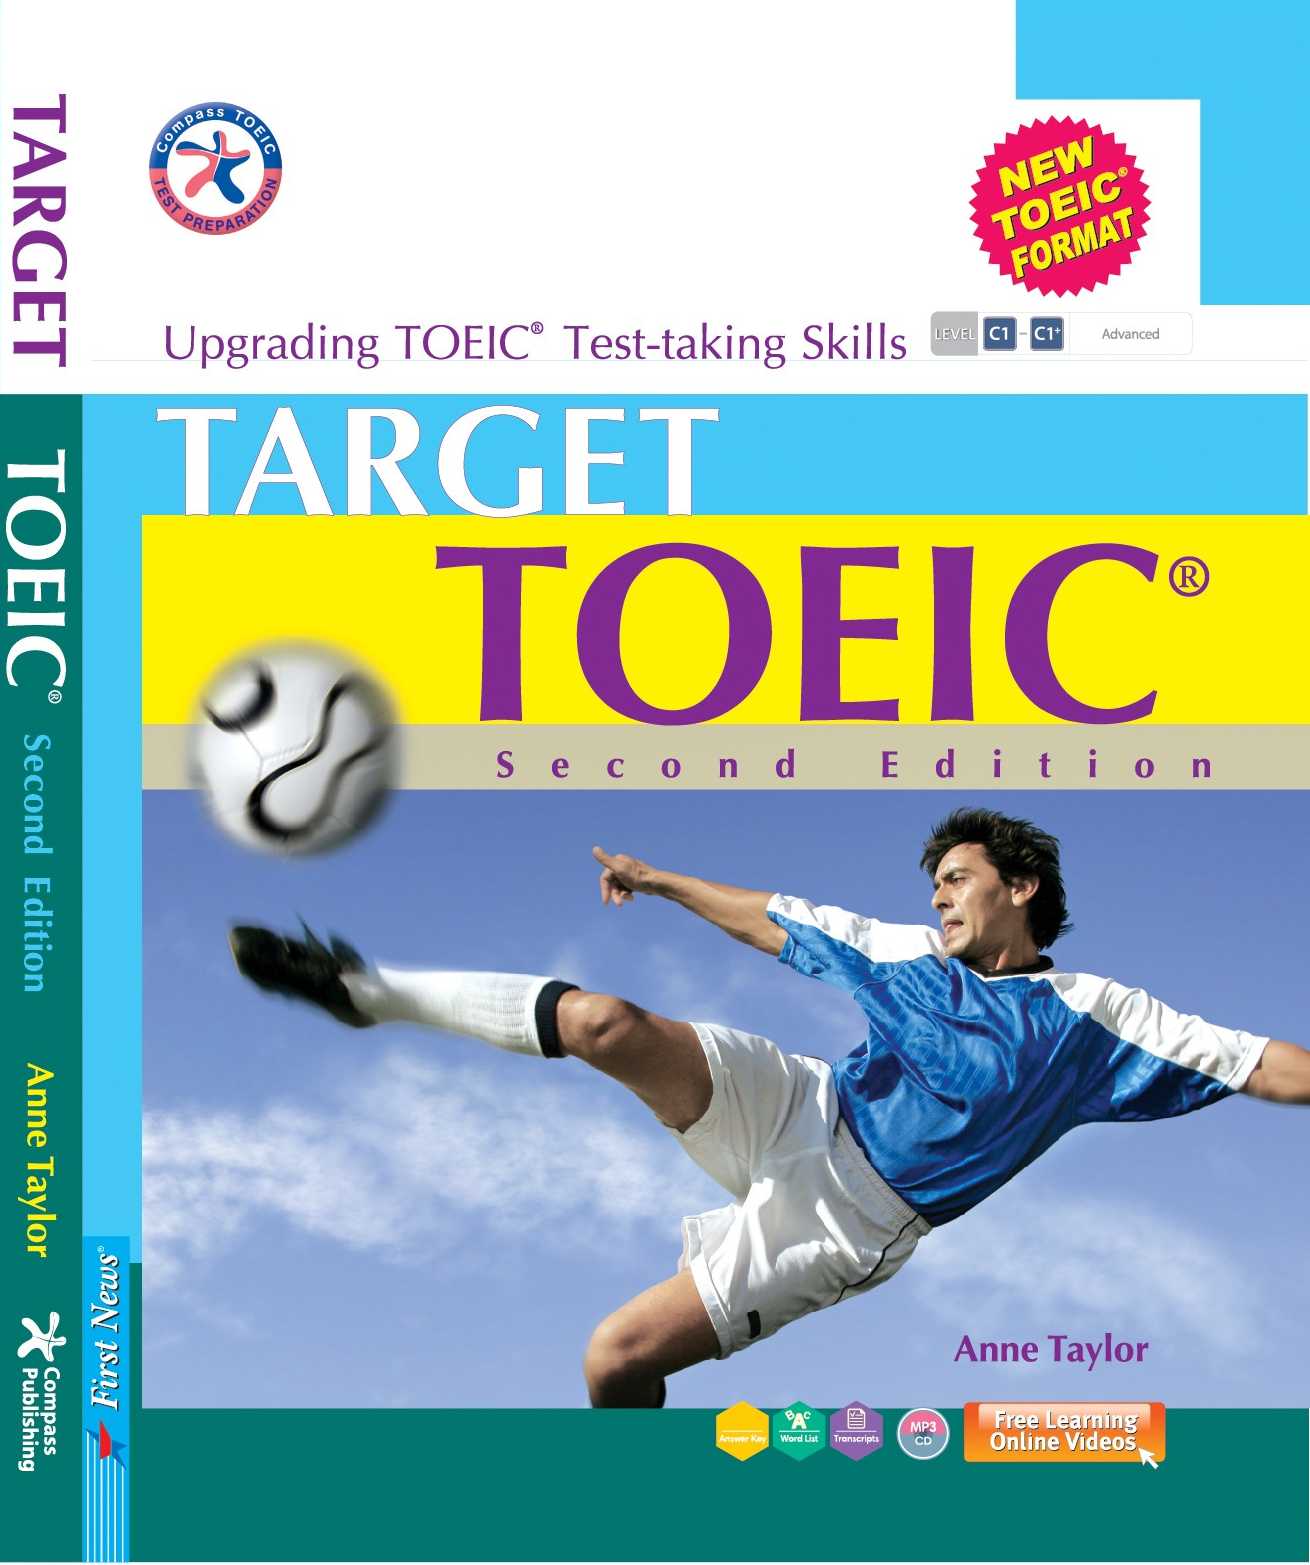 Target Toeic Second Edition PDF